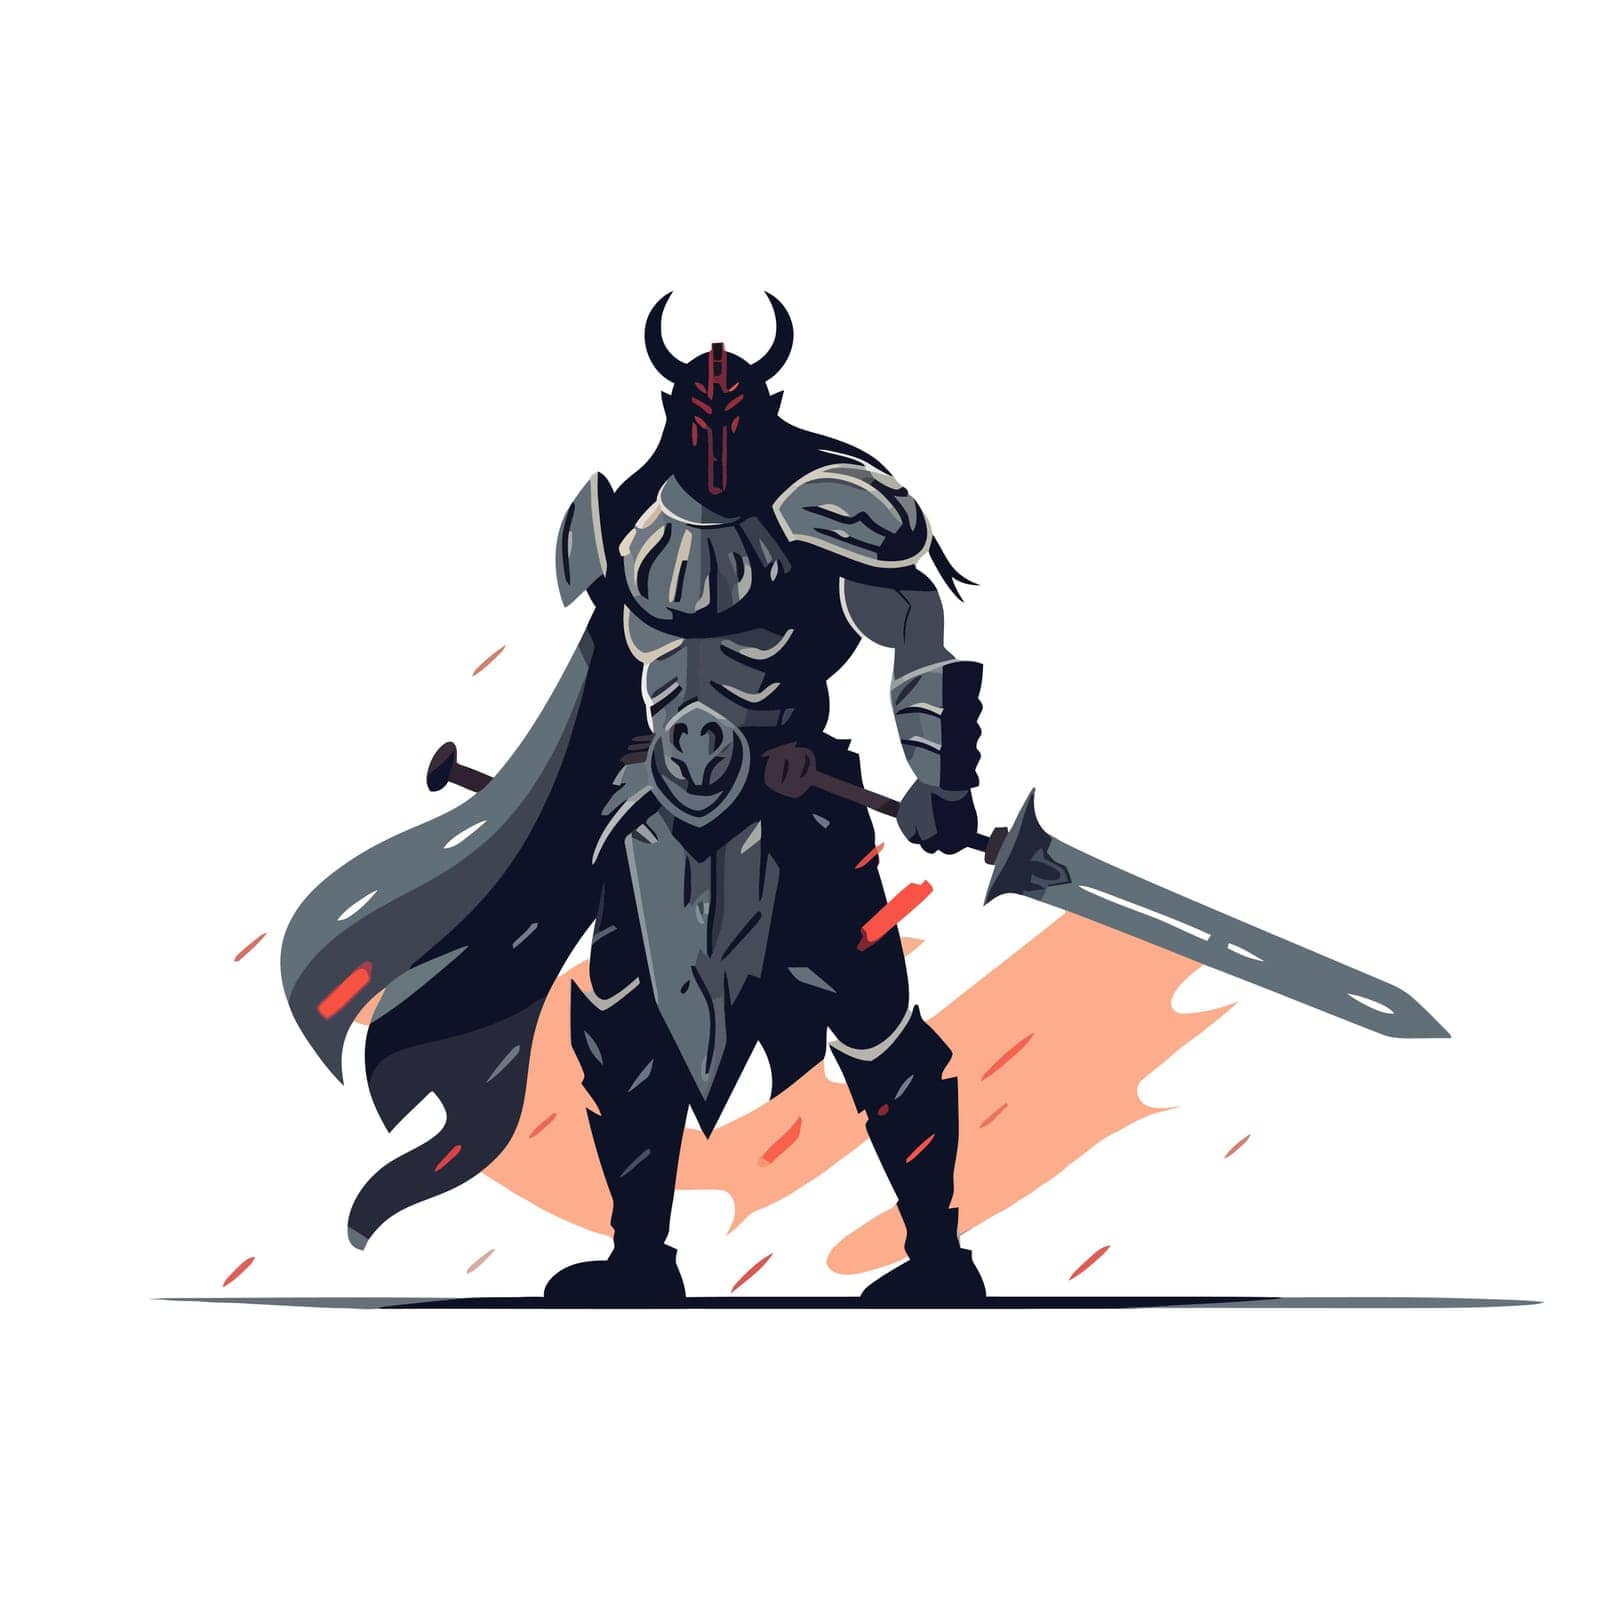 Image of warrior with weapons. Ancient warrior soldier. Vector illustration